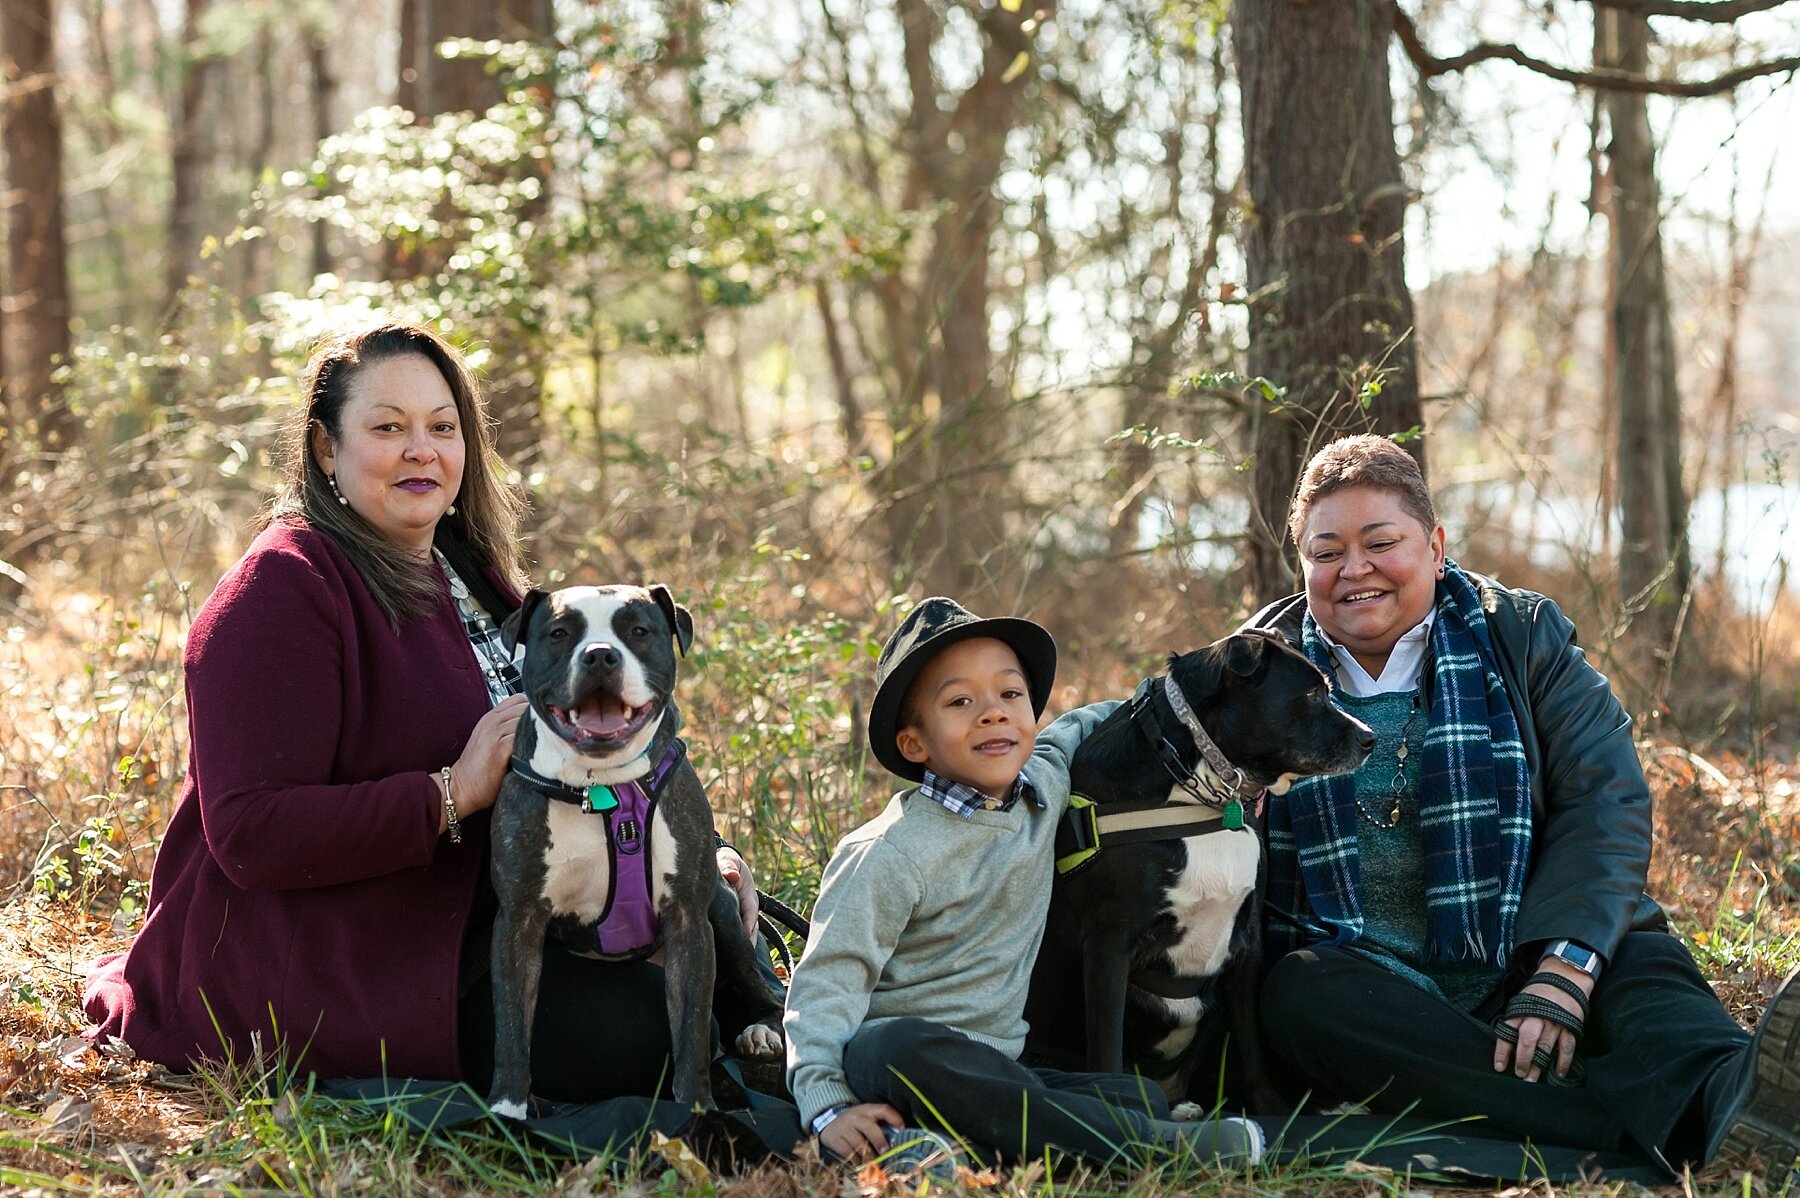 Wendy Zook Photography | Lake Linganore family portraits, lakeside family photos, family photos with dogs, family photos with aunt, Lake Linganore MD family photos, family photos in Maryland, Frederick MD family photographer, family photos in the fall, family photos in the woods